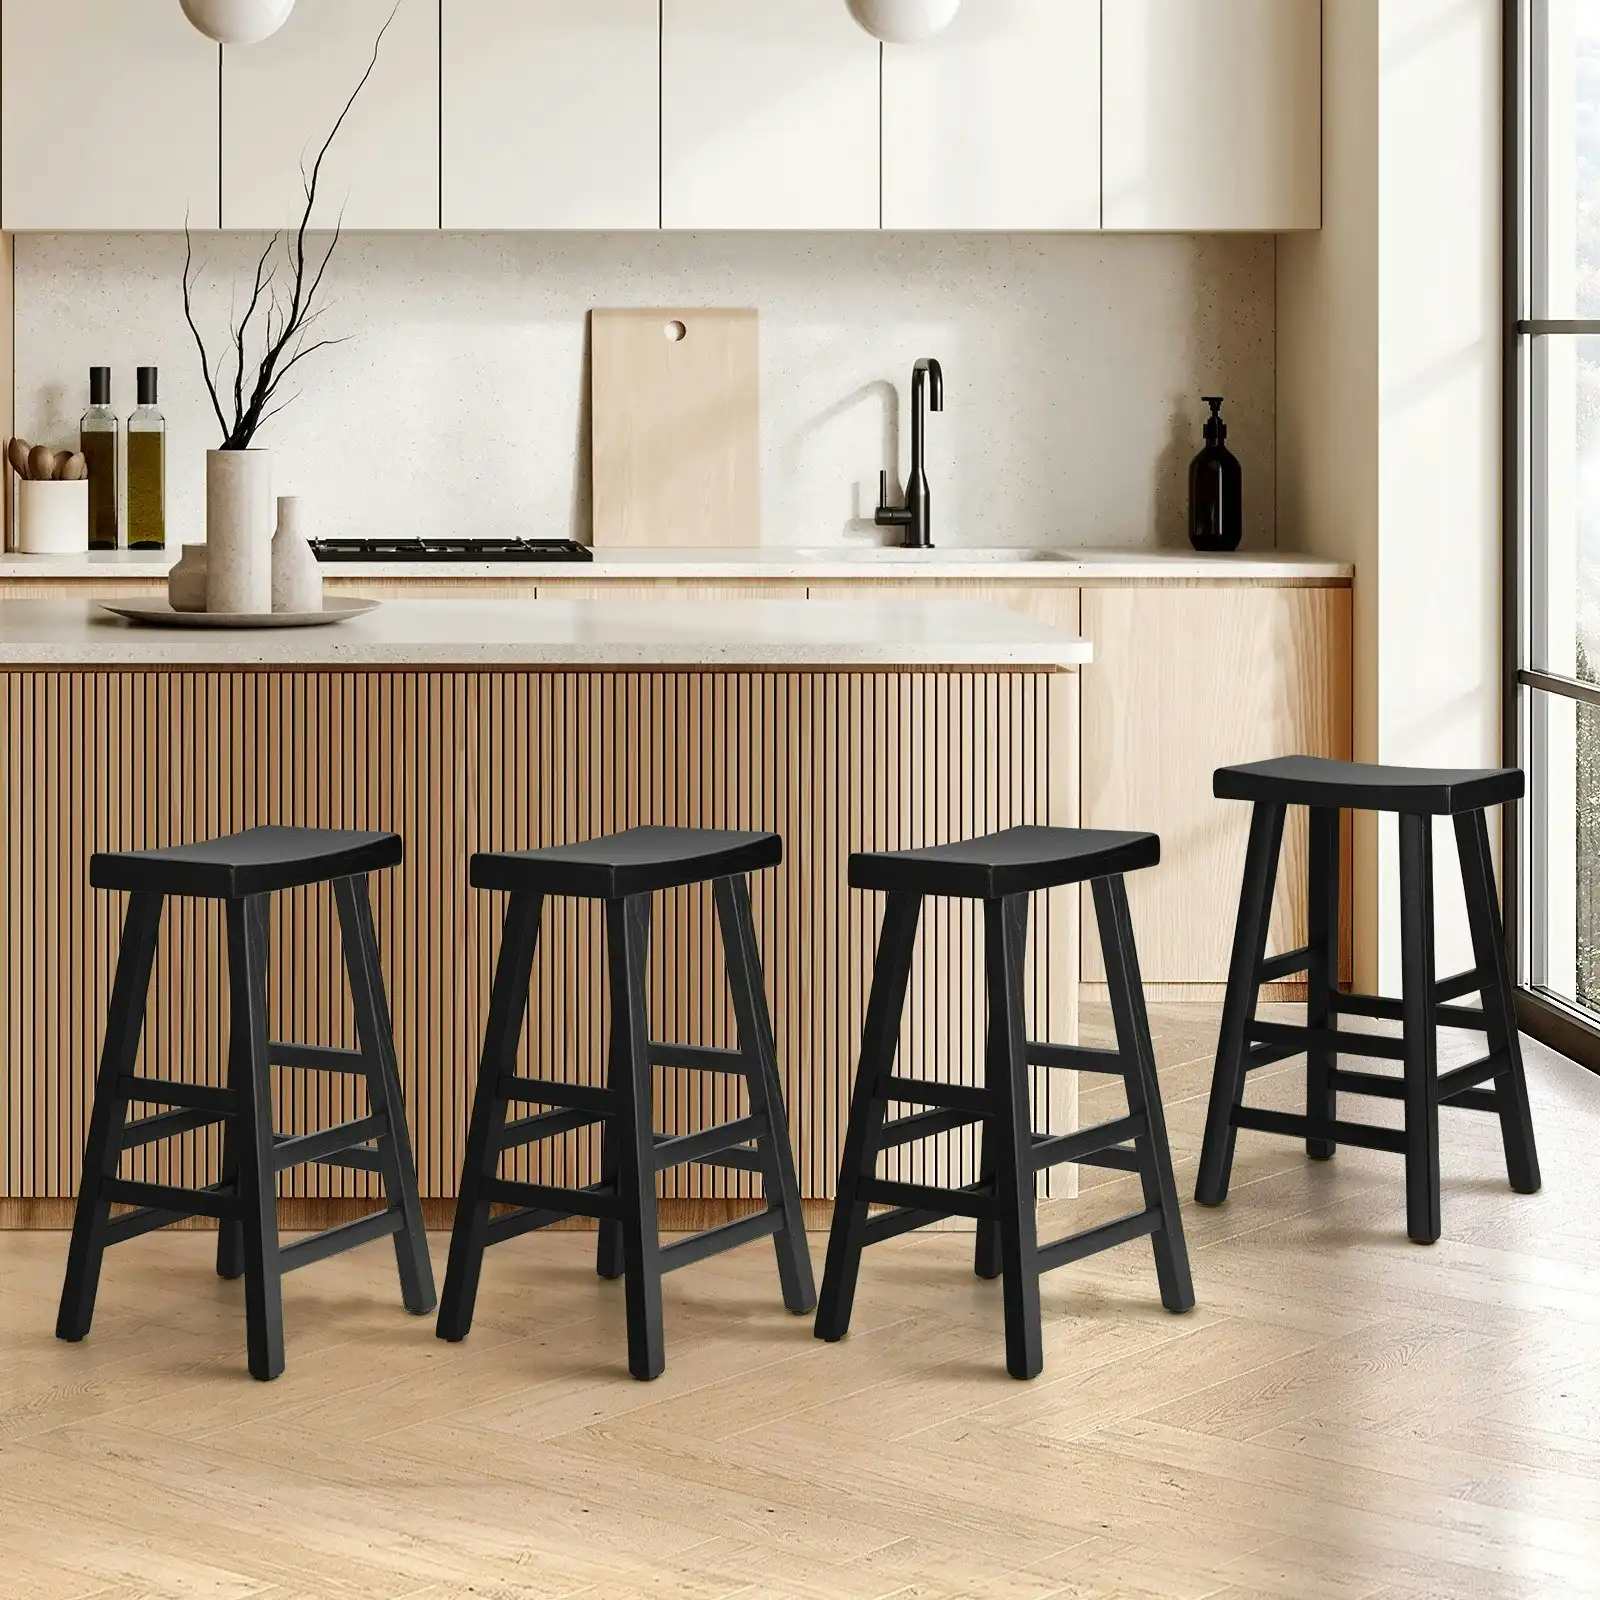 Oikiture 4X Bar Stools Kitchen Stool Wooden Counter Chairs Barstools Black